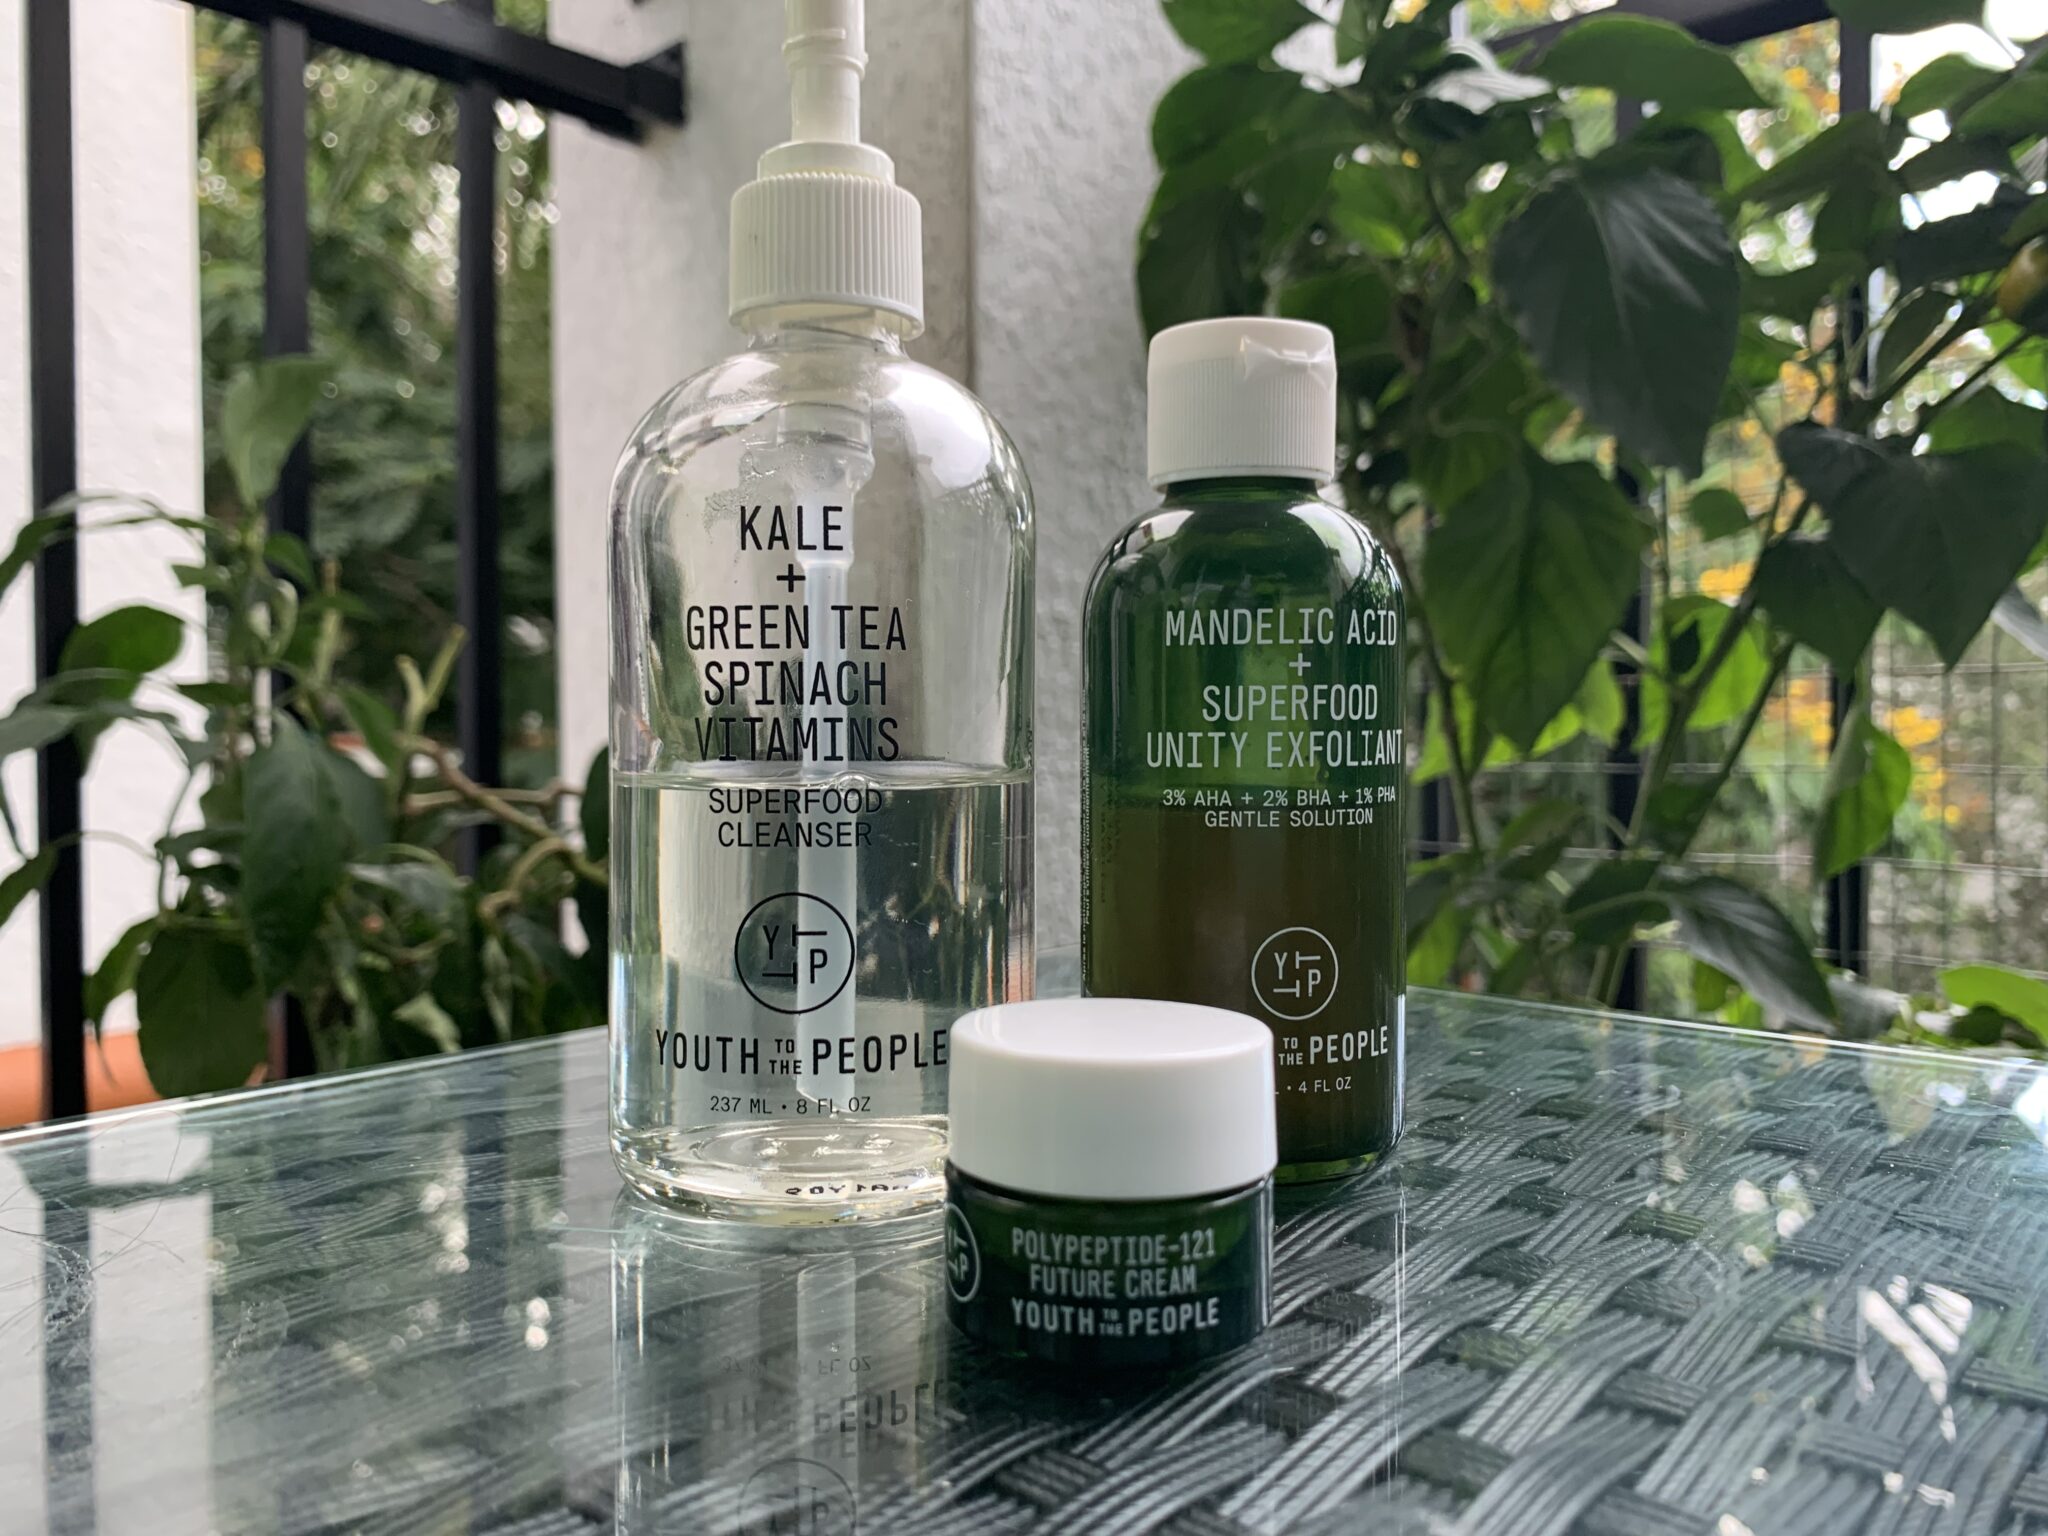 Youth to the people product reviews; kale cleanser, mandelic acid cleanser, polypeptide cream